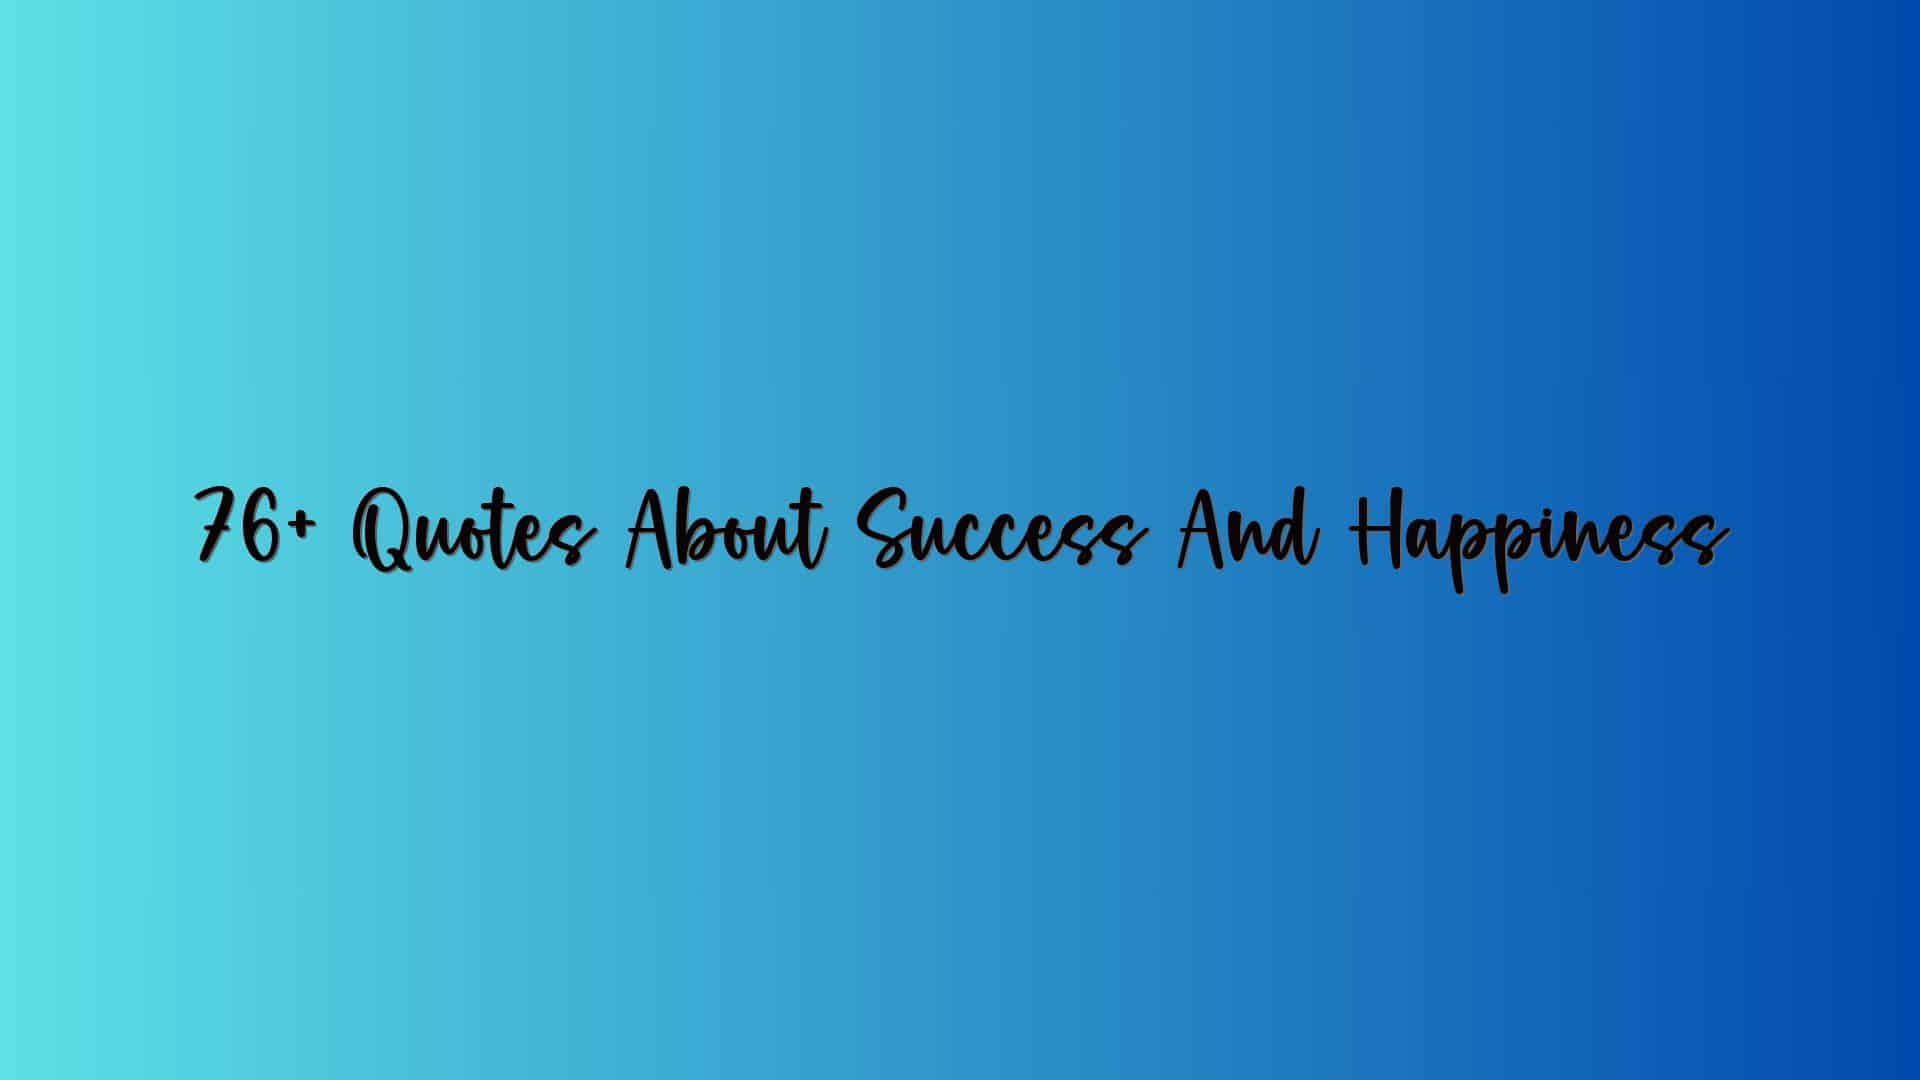 76+ Quotes About Success And Happiness